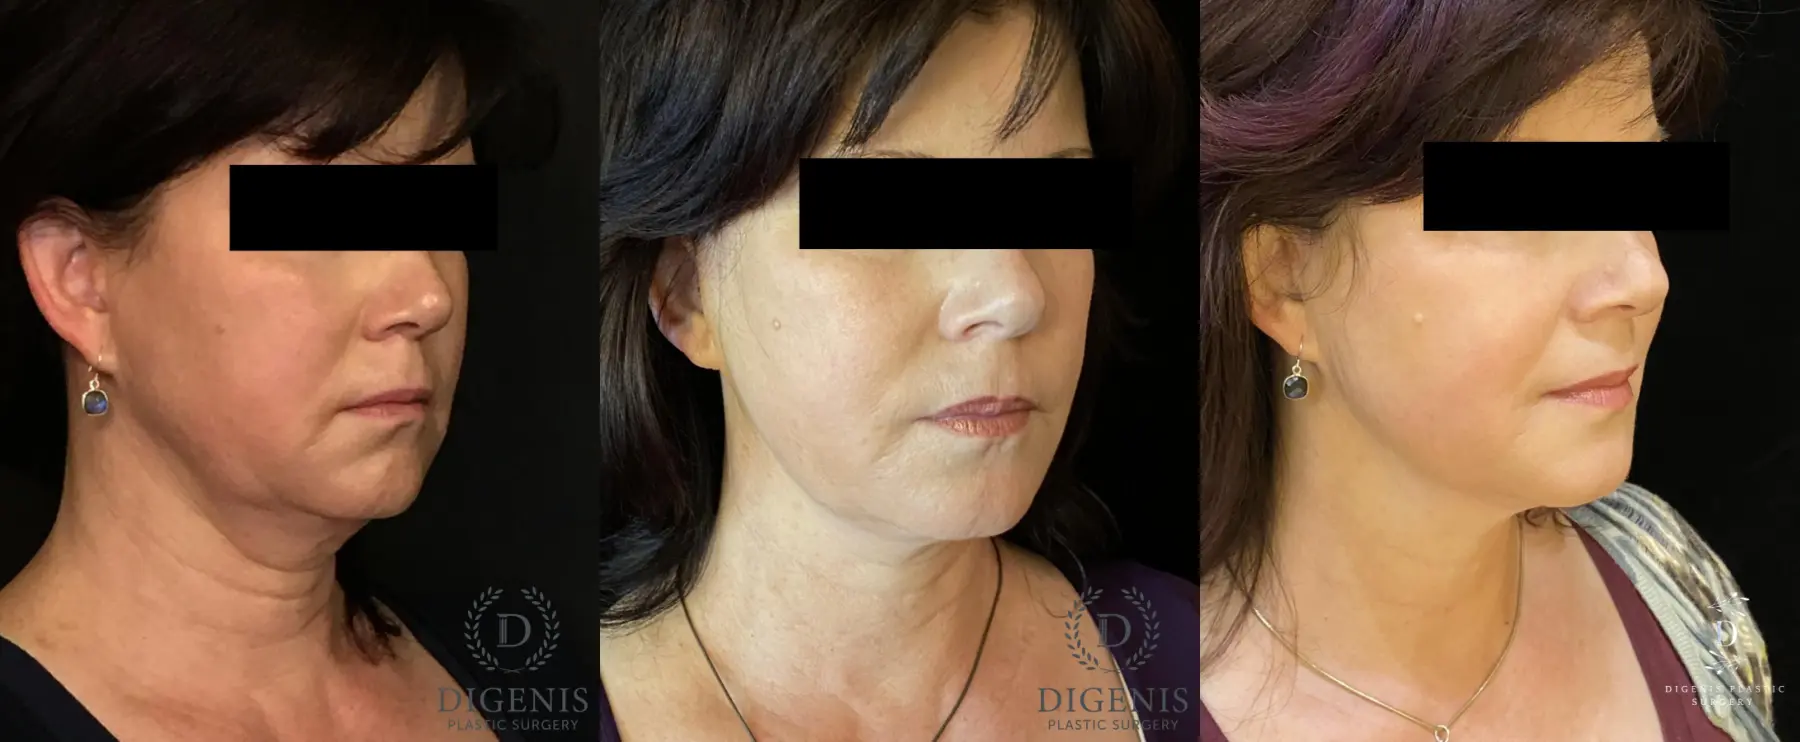 Digenis Refresh Lift: Patient 4 - Before and After 2